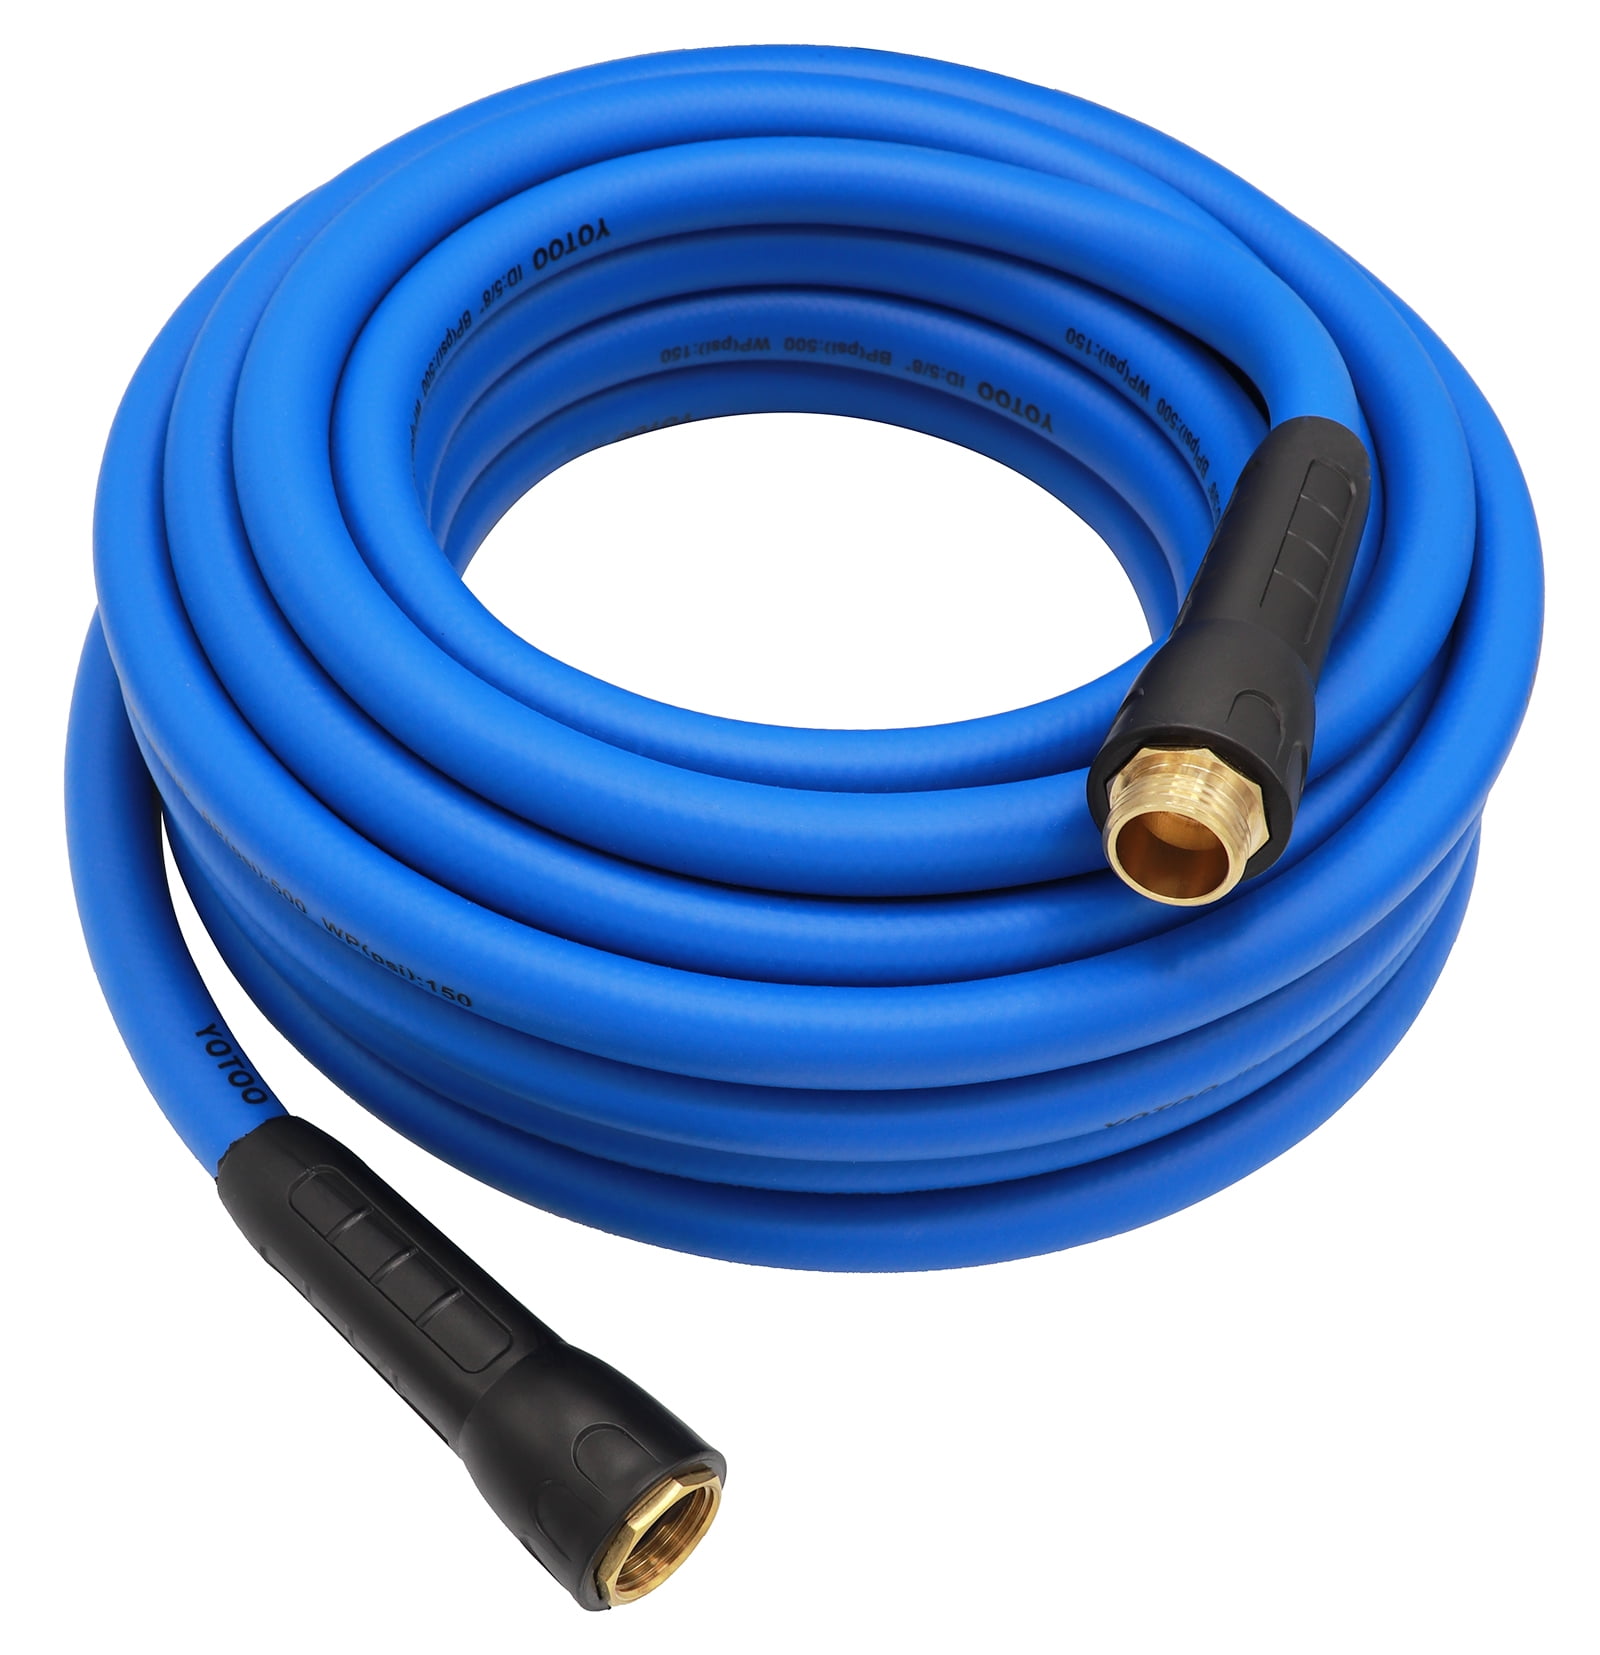 GHT Ends No Kinking All-Weather Flex 5/8 in Garden Hose with 3/4 in x 50 ft 